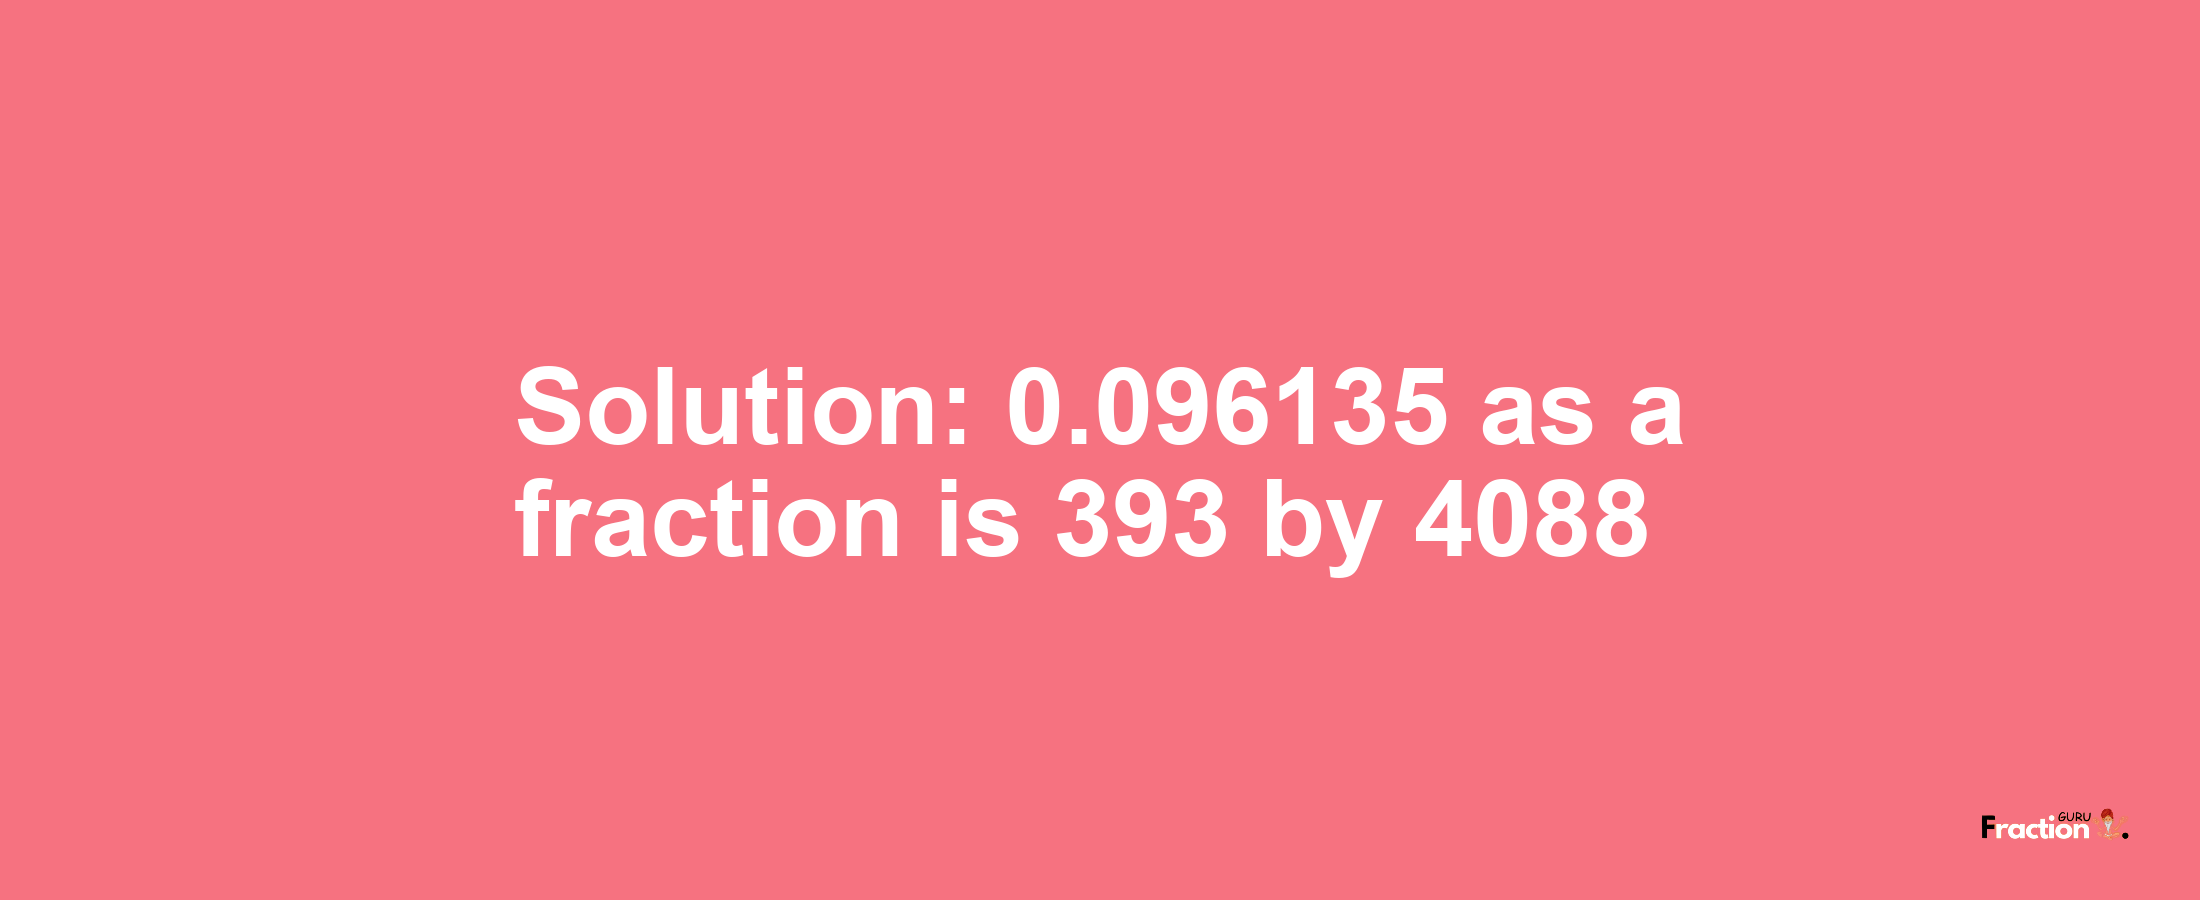 Solution:0.096135 as a fraction is 393/4088